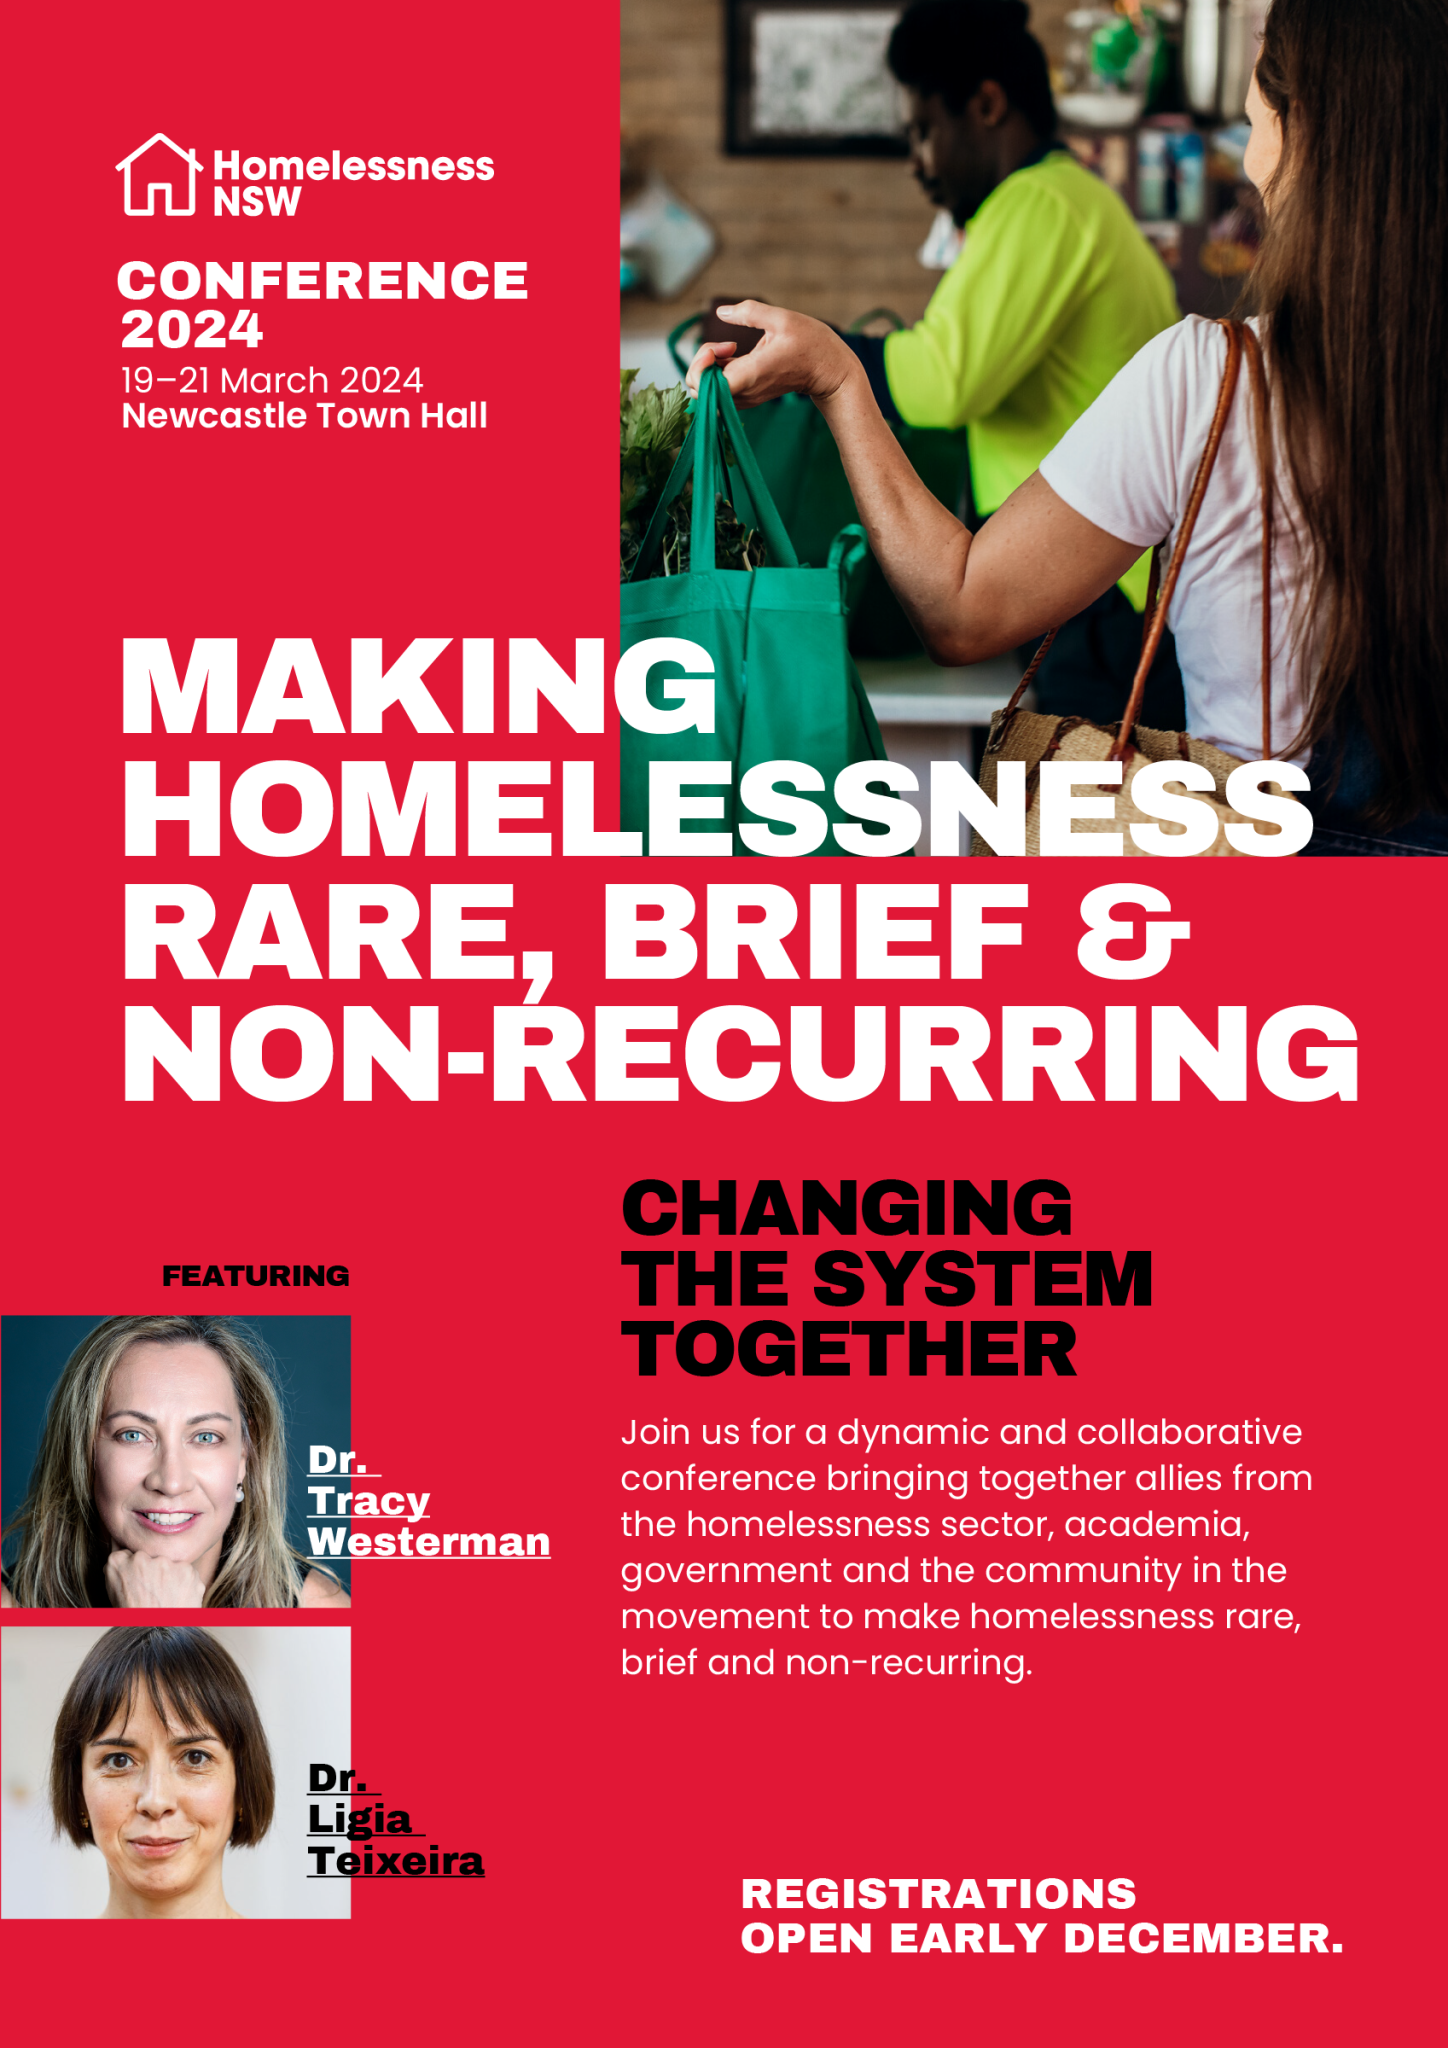 Registrations open soon for the 2024 Homelessness NSW Conference